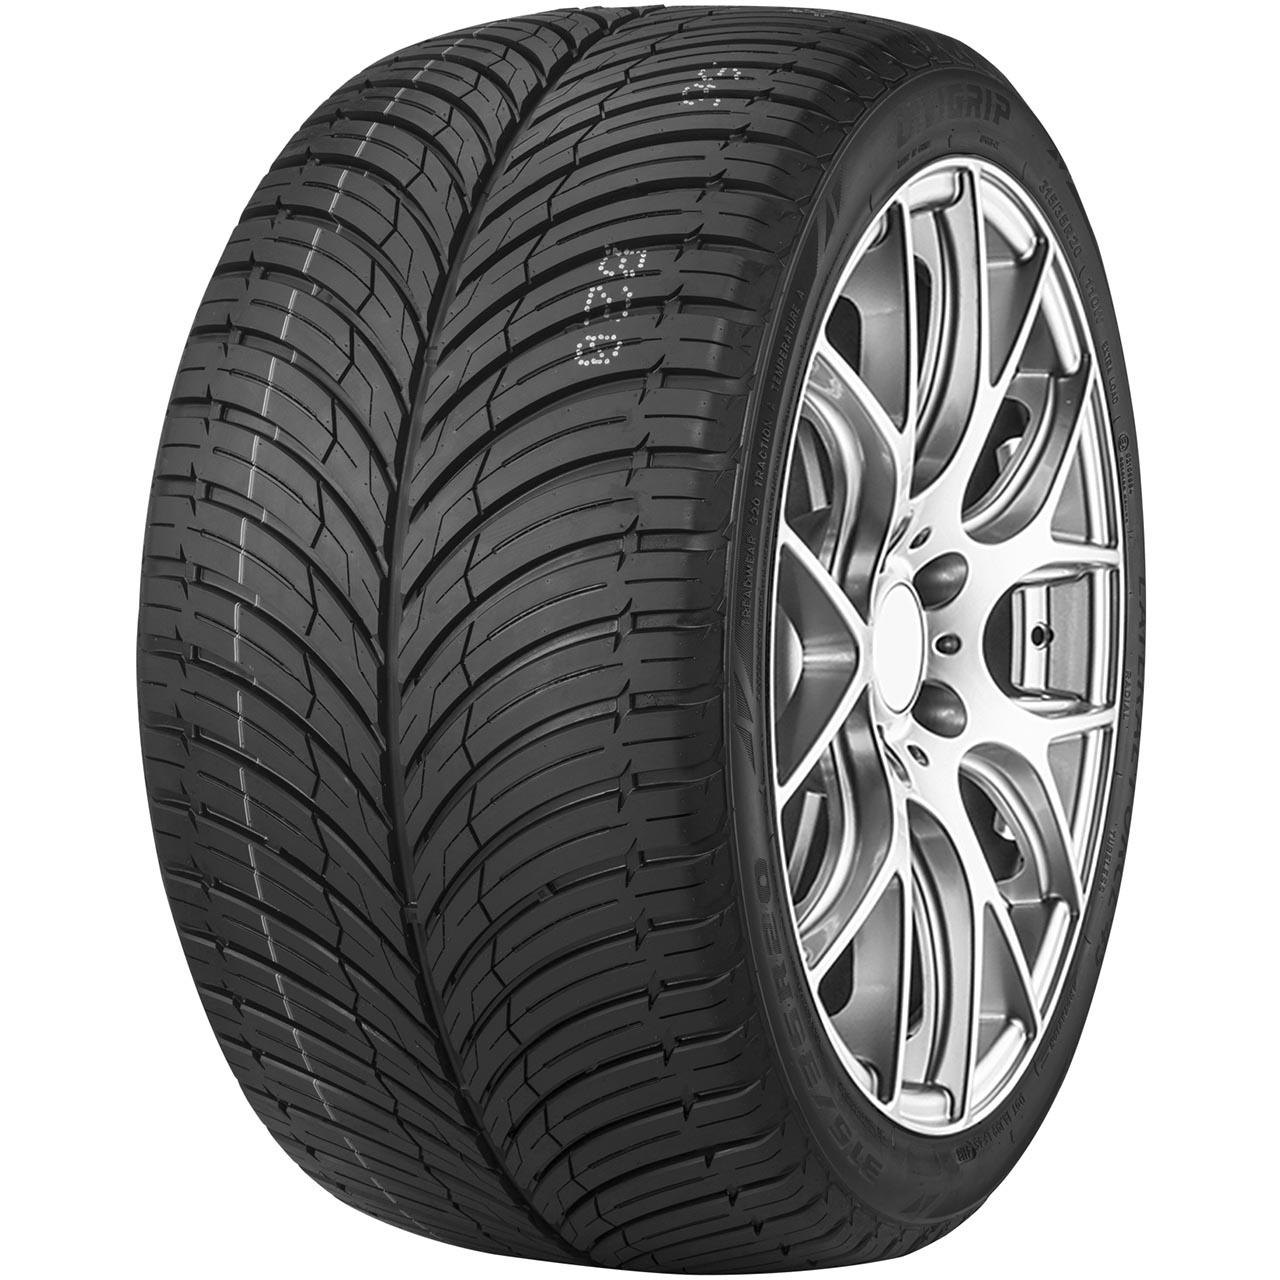 Unigrip Lateral Force 4S 265/45R20 108W XL